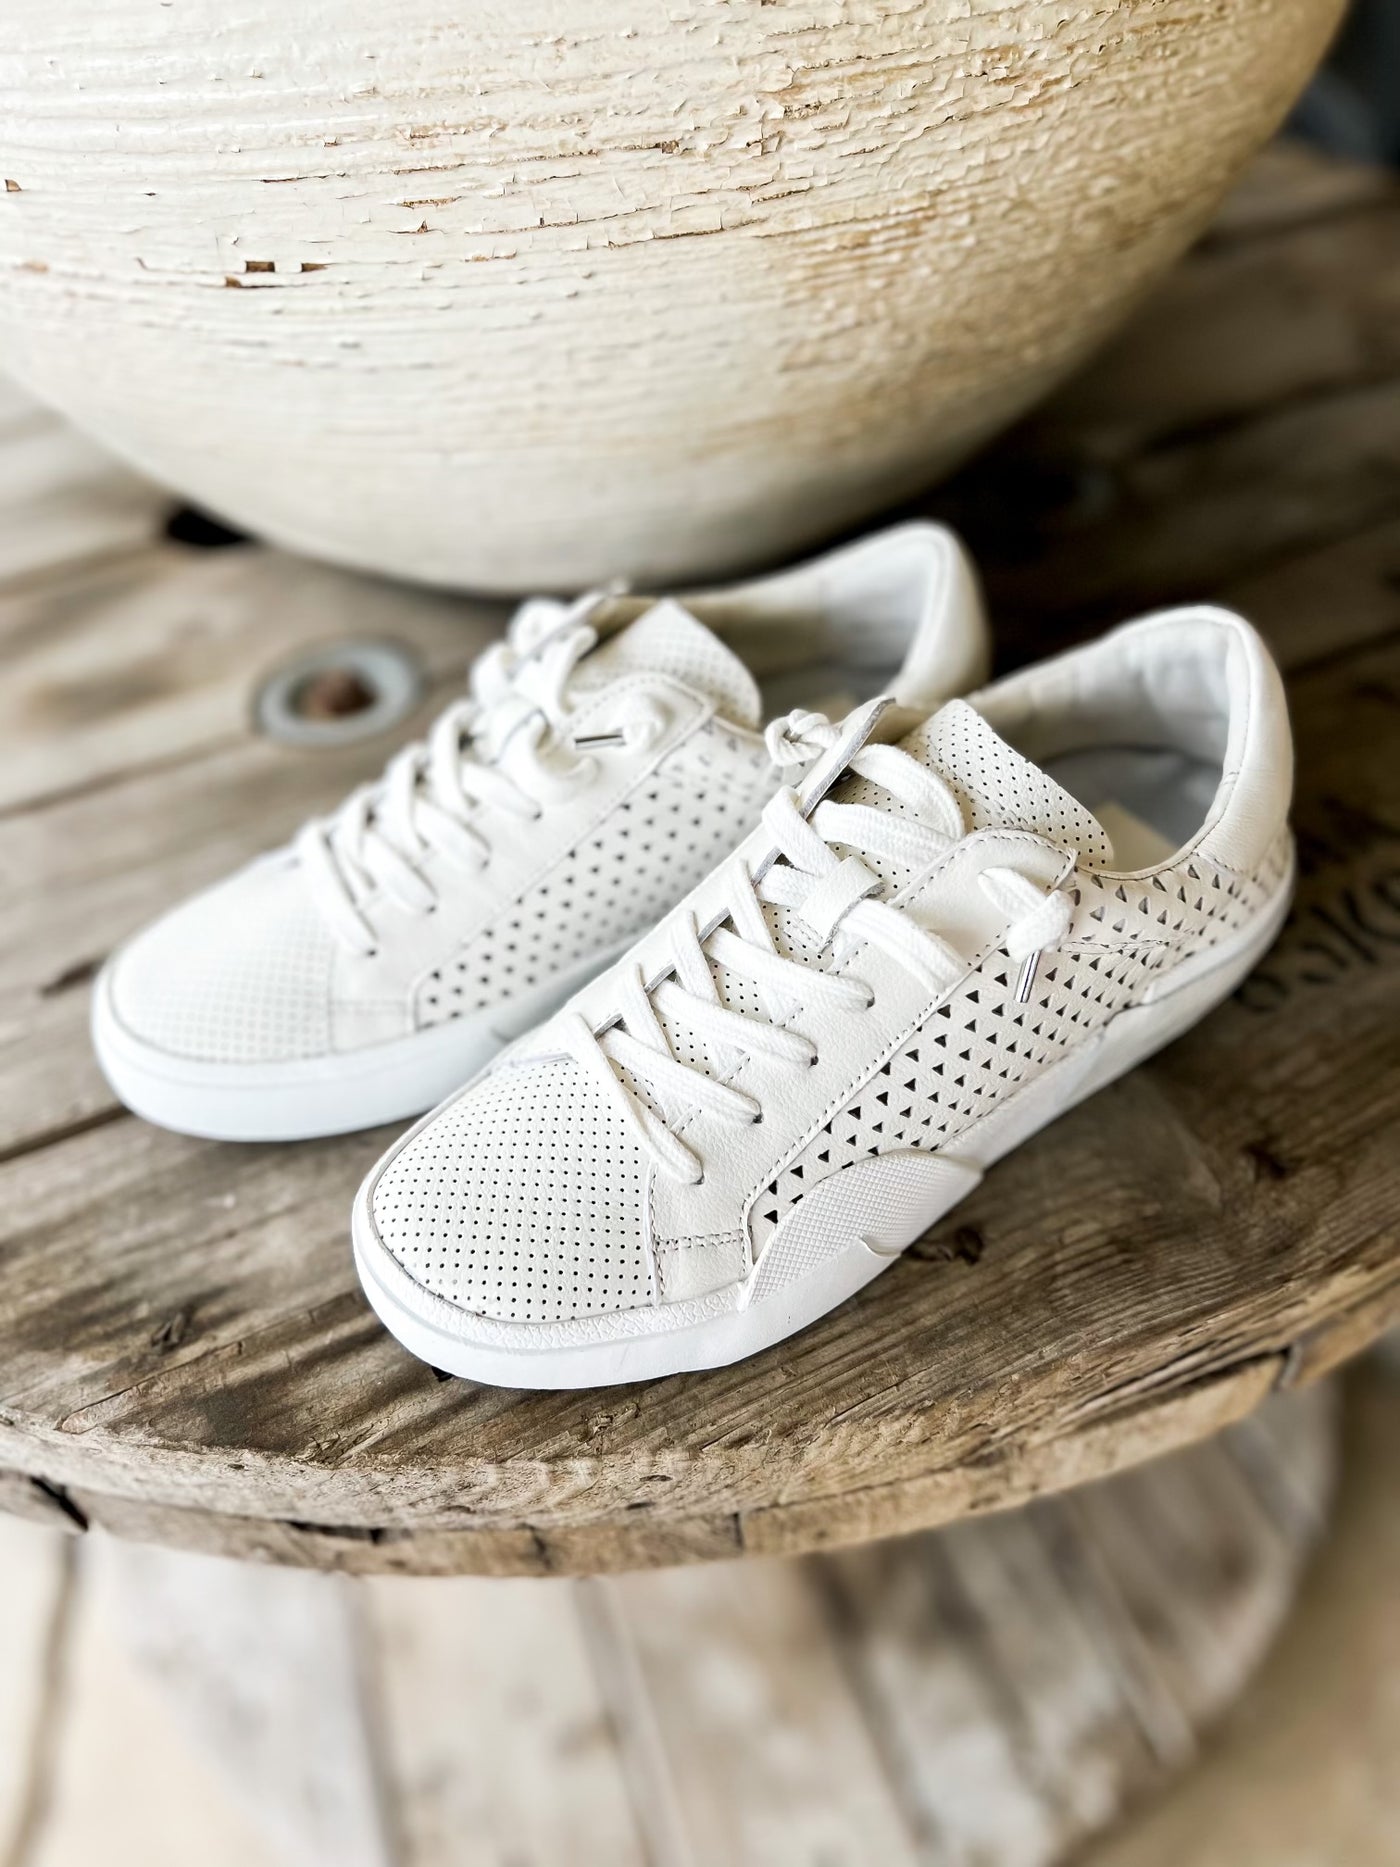 Dolce Vita Zina White Perforated Leather